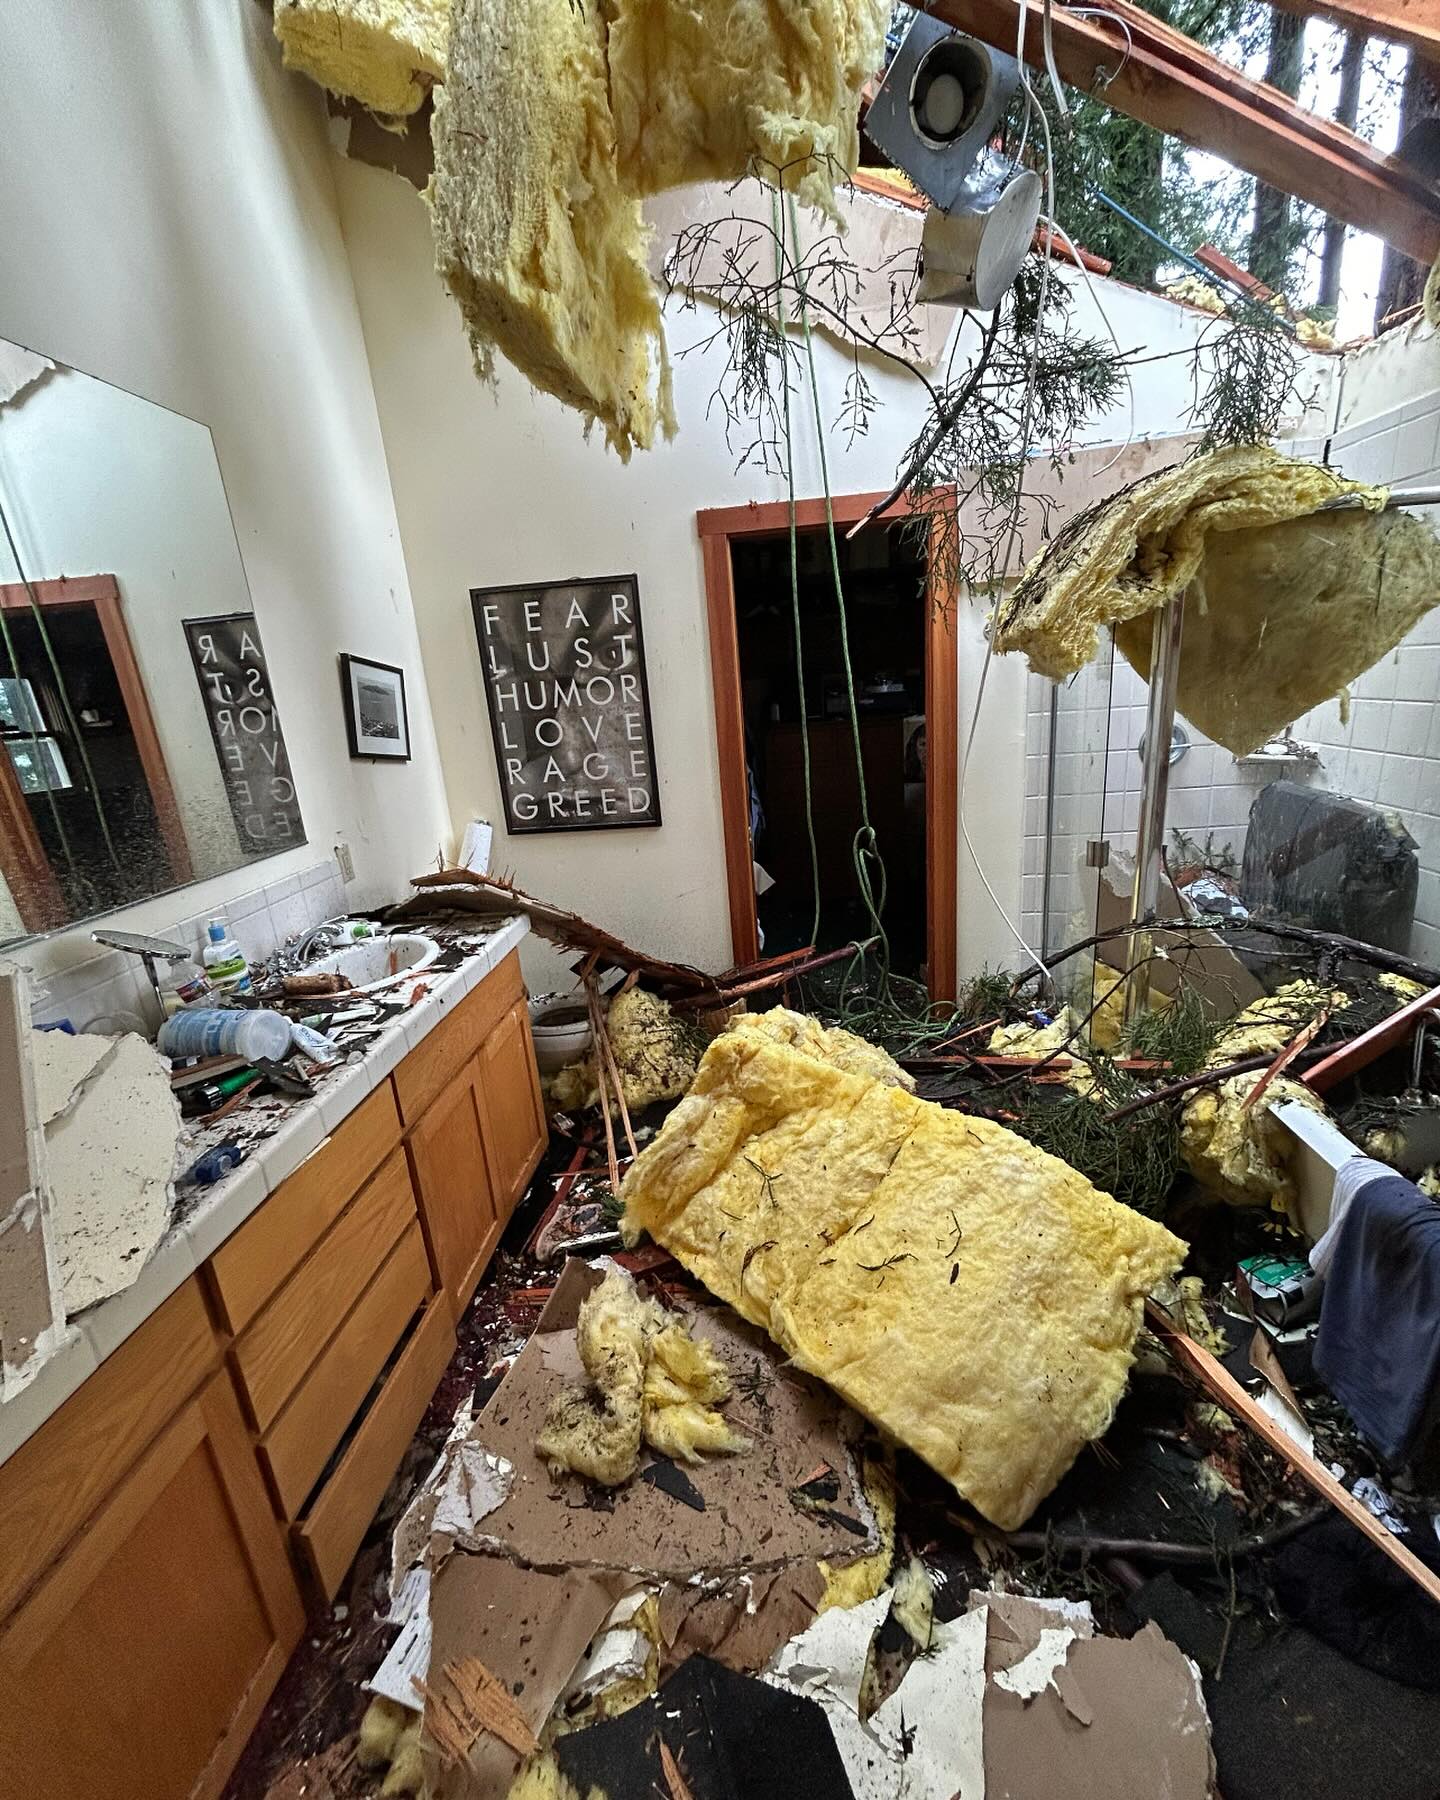 A bathroom with extensive damage; the ceiling and insulation have collapsed, and debris covers the floor. Several household items are scattered, and a broken tree branch is visible inside. Comprehensive water damage restoration is urgently needed to address the devastation.